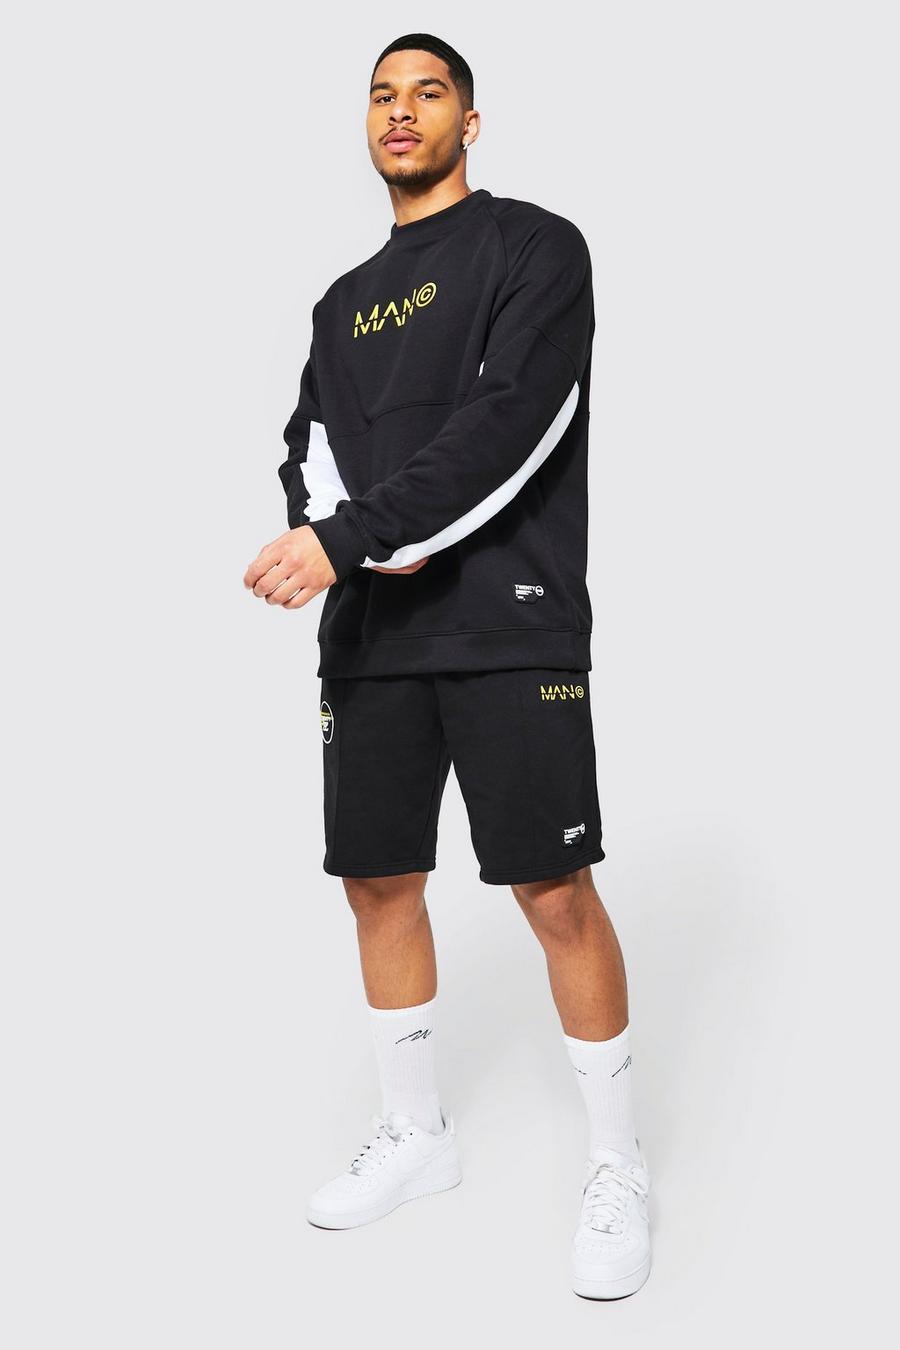 Black negro Tall Extended Neck Sweater Short Tracksuit